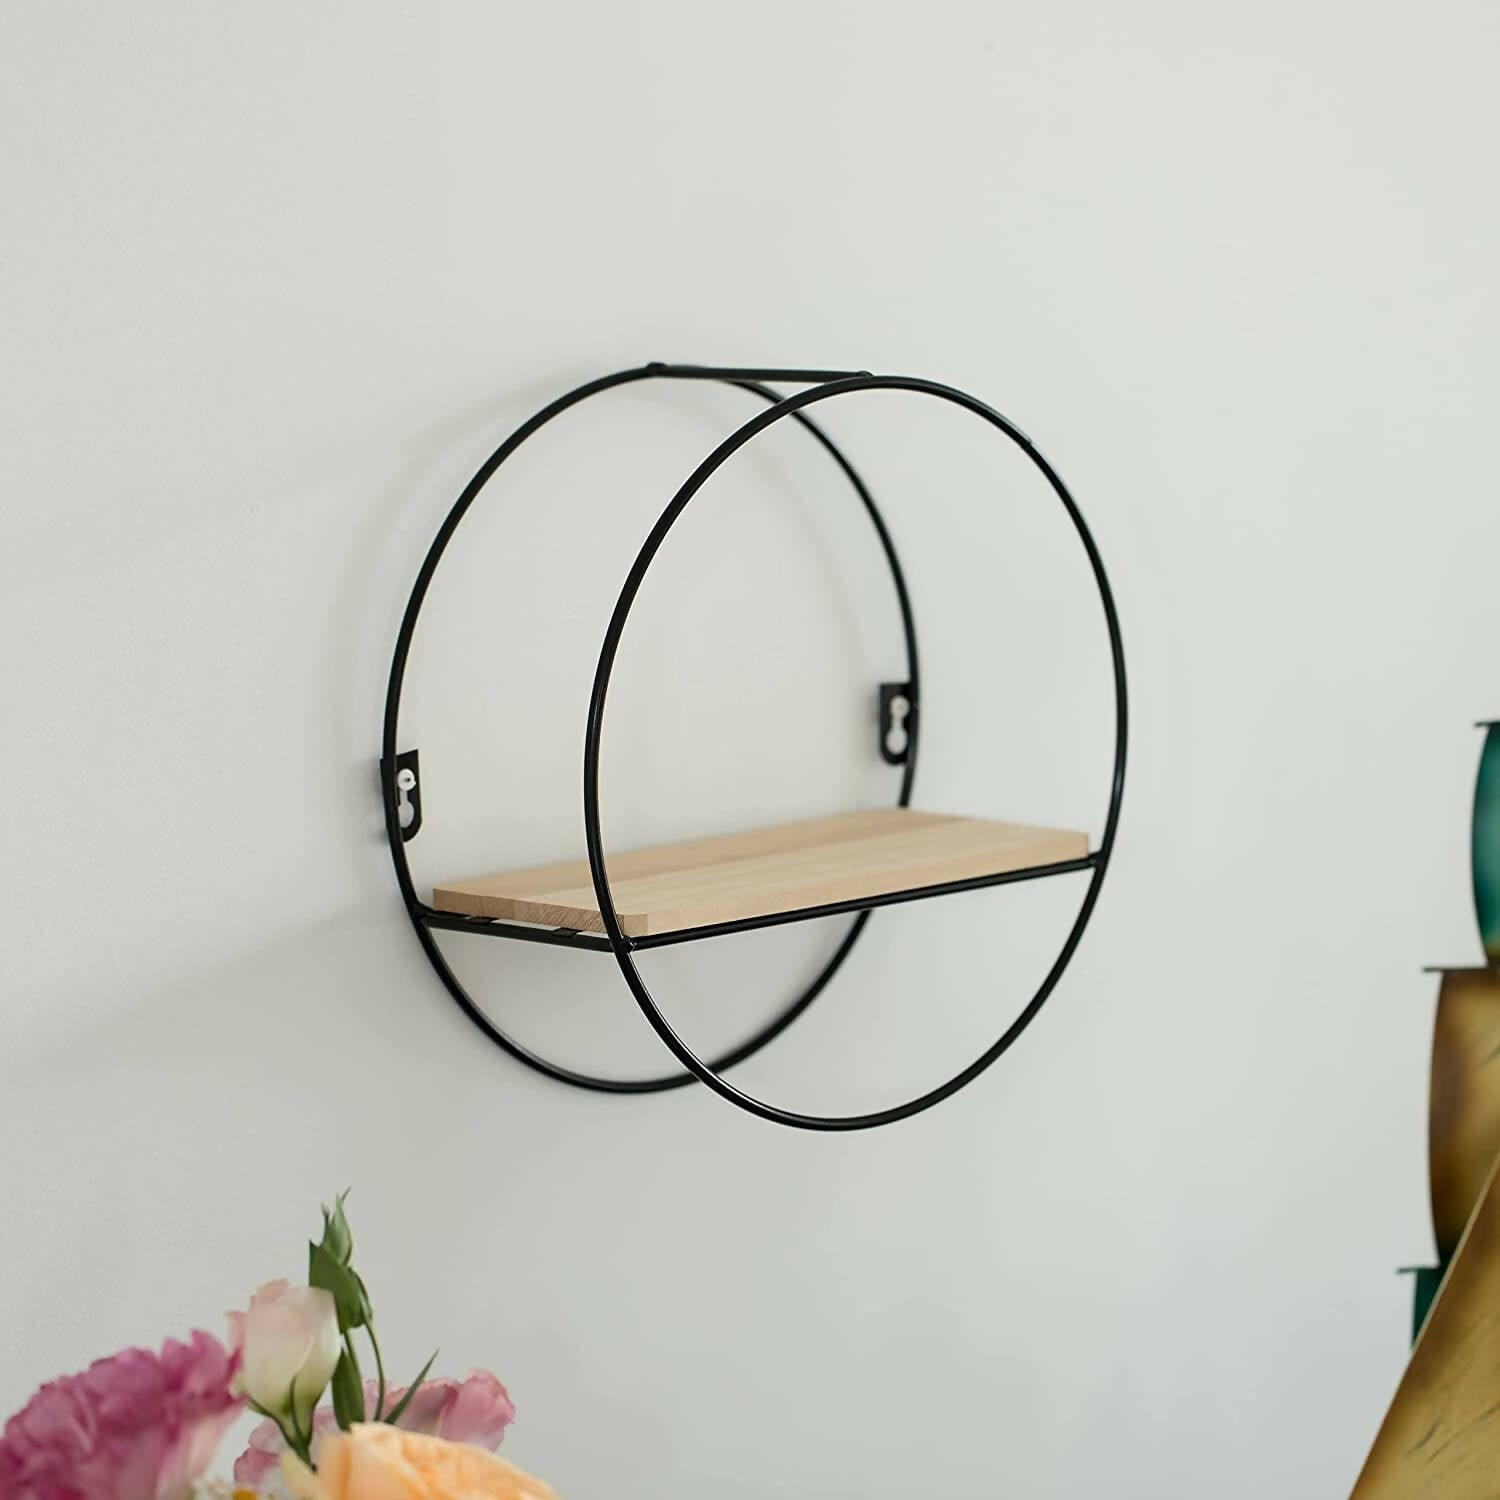 Decorative Modern Round Accent Floating Shelf Circle Decor Display Wall Mounted Rack With Metal Frame and Pine Wood Shelf, Black Customized by Creative Decore - ValueBox